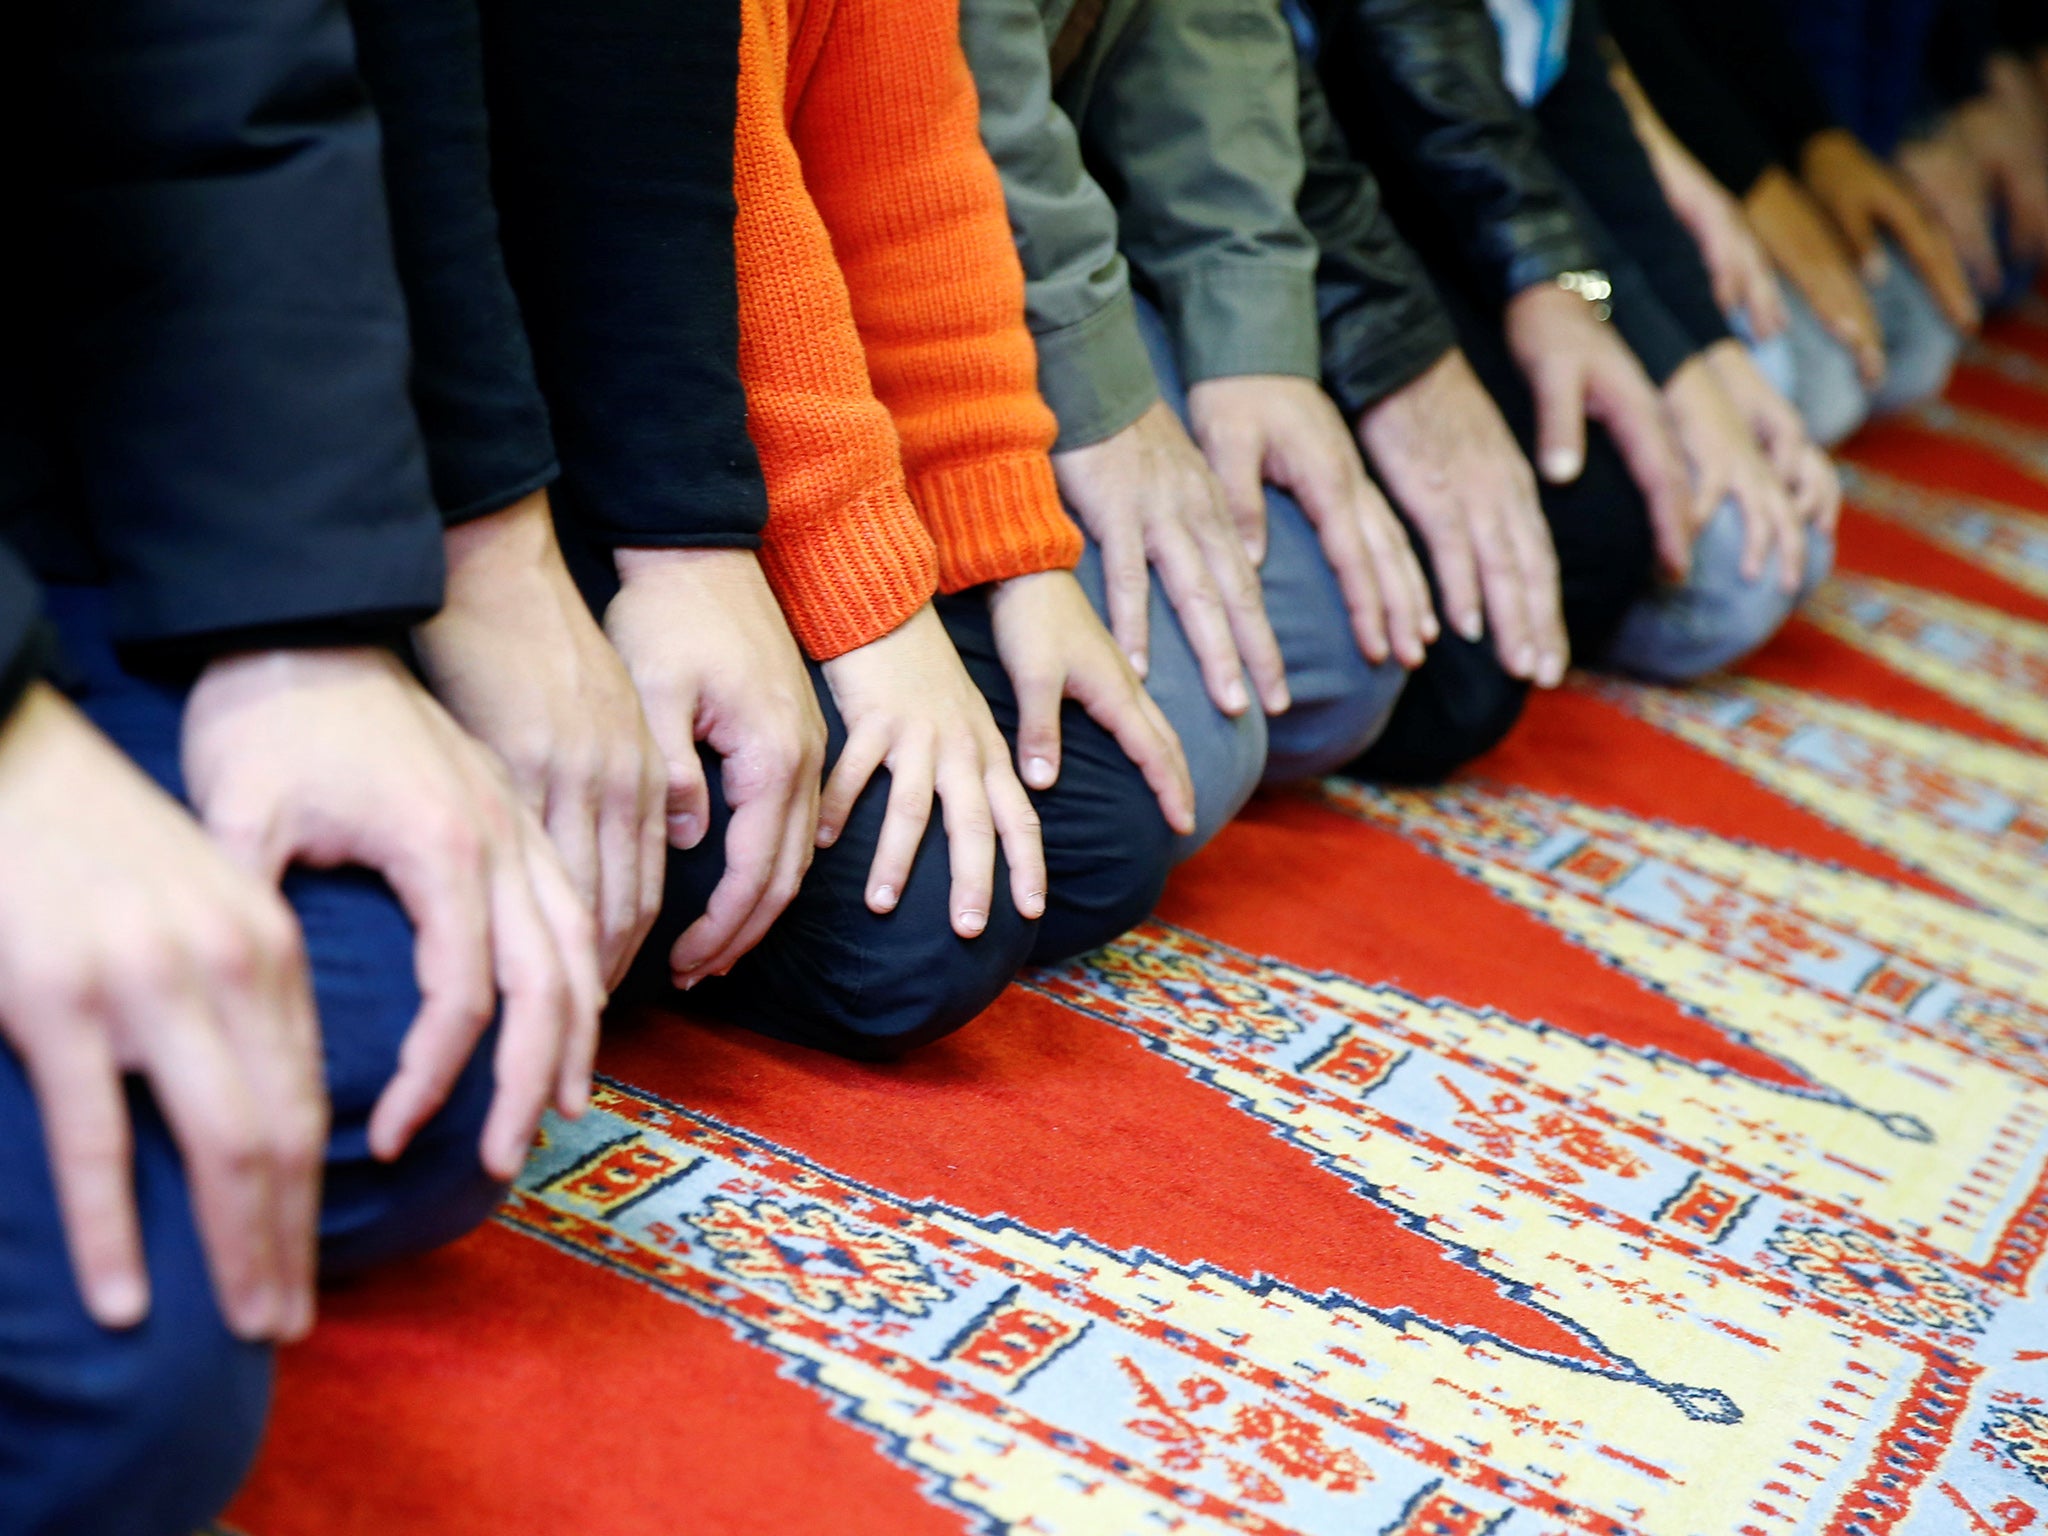 School administrators at the school in Germany which recently banned prayer mats said their use was 'provocative'